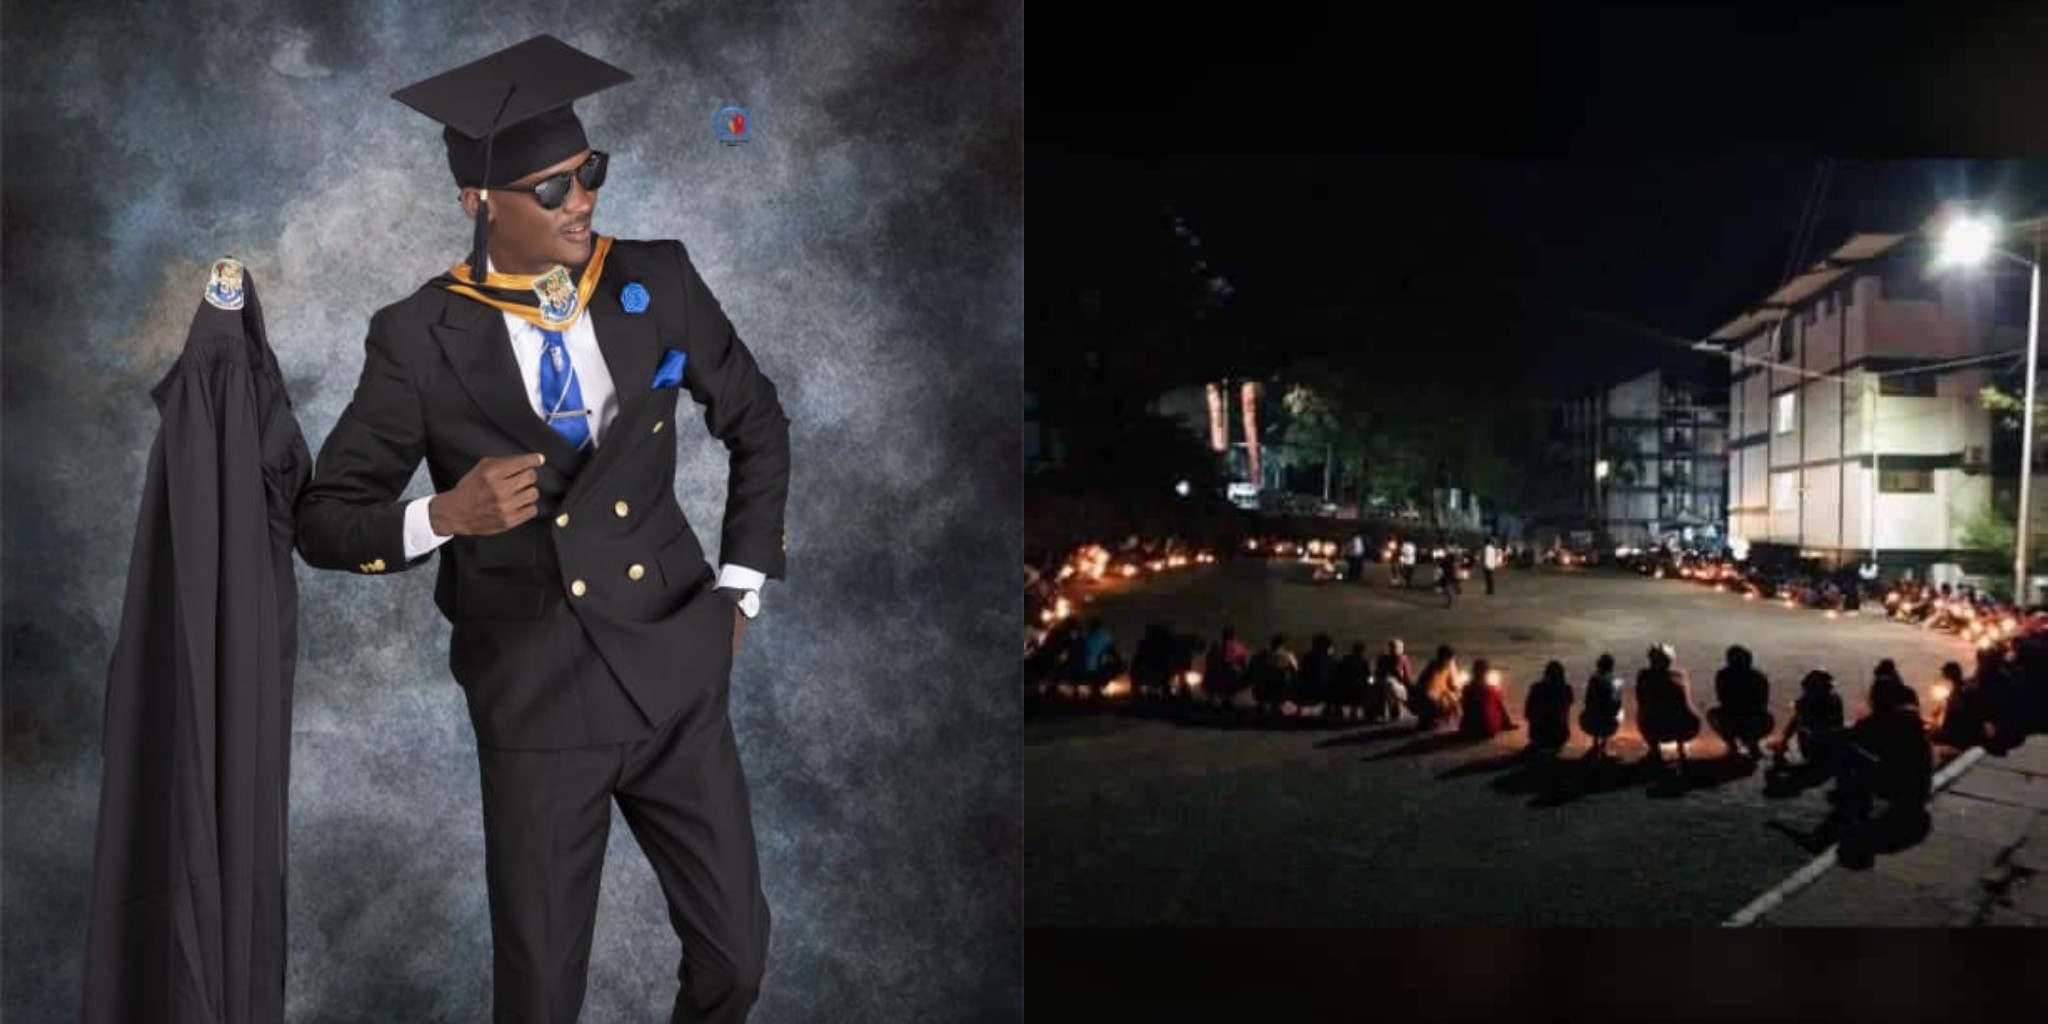 FBC Students Organise Candle Light to Mourn Colleague That Died Before Graduation